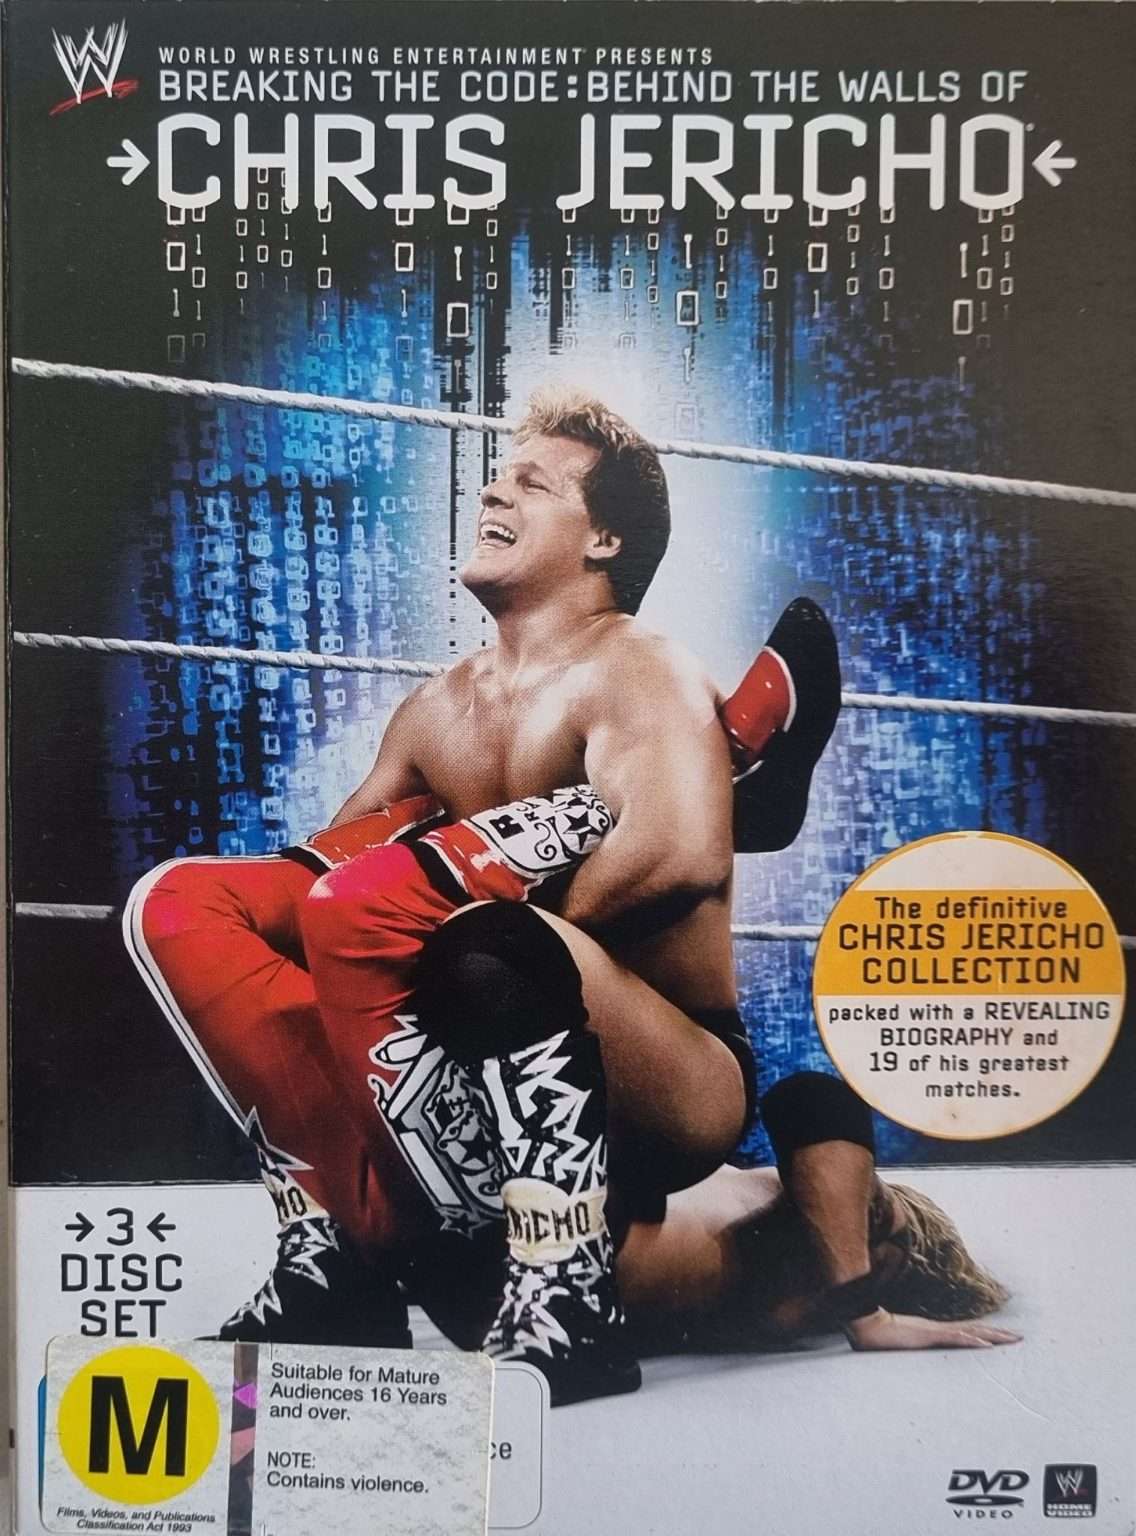 WWE: Breaching the Code: Behind the Walls of Chris Jericho 3 Disc Set